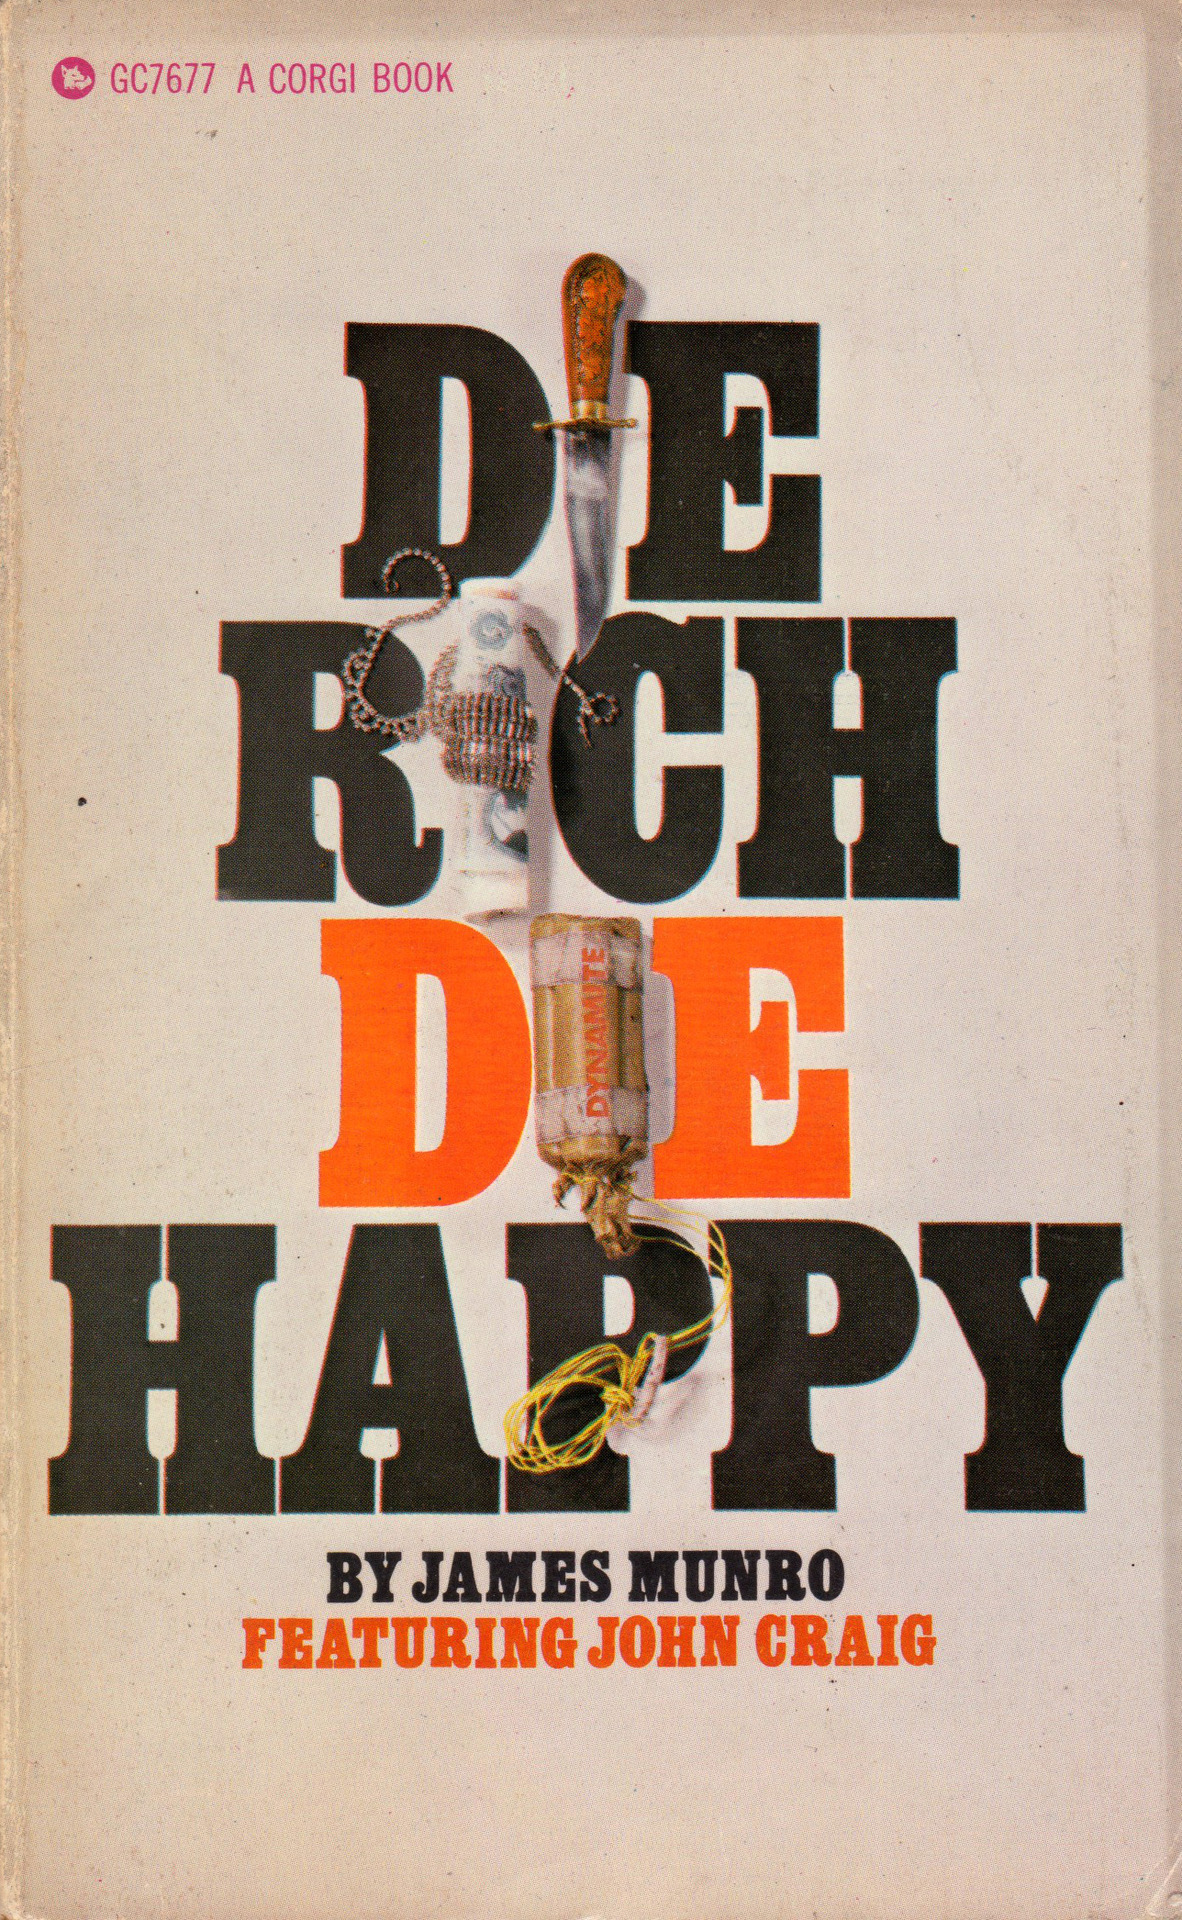 Die Rich Die Happy, by James Munro (Corgi, 1967).From a bookshop on Charing Cross